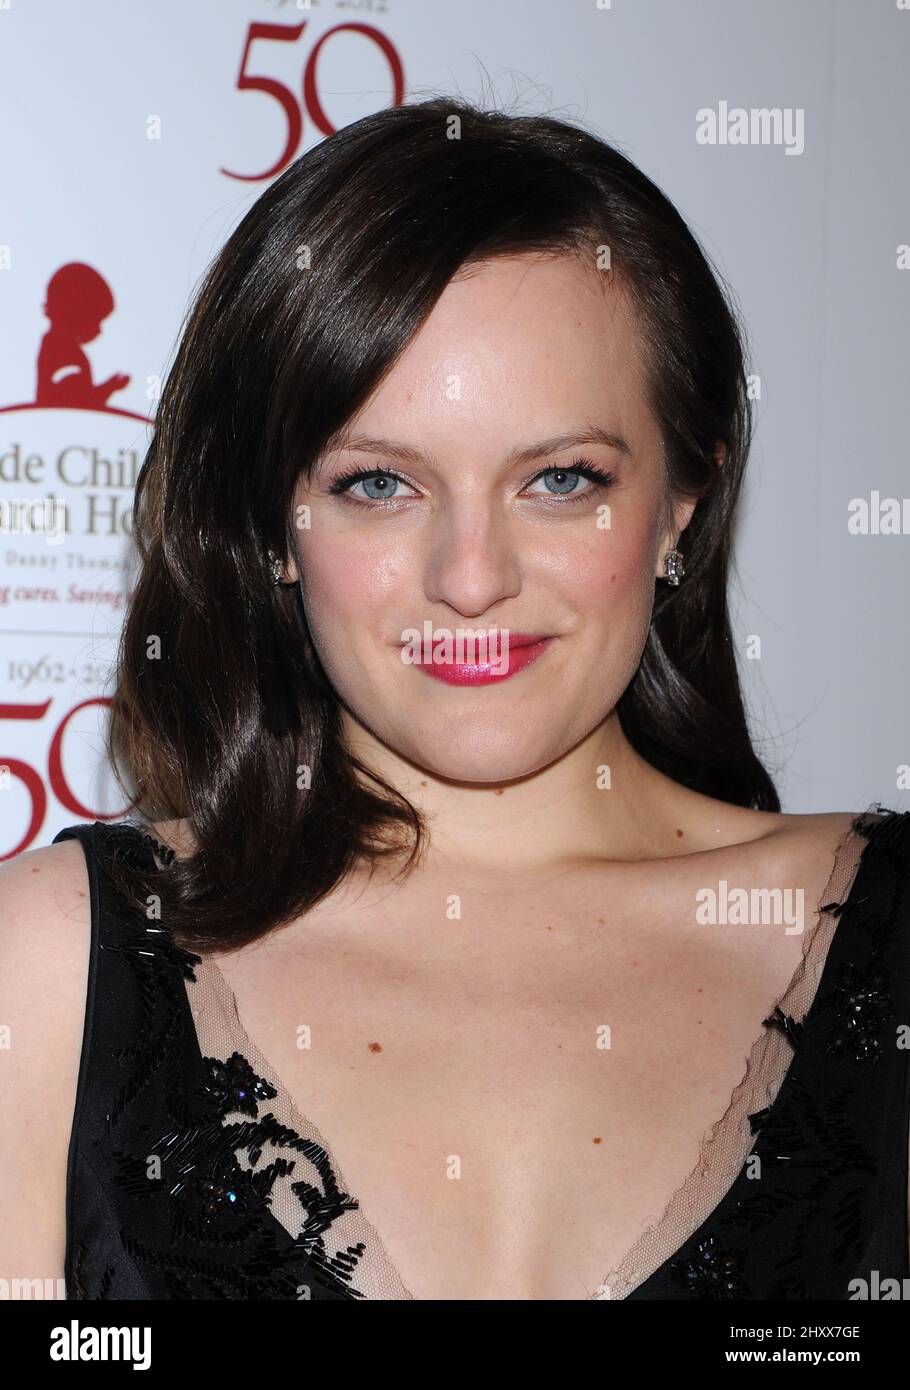 Elisabeth Moss attending the St. Jude Children's Research Hospital 50th Anniversary Gala held at the Beverly Hilton Hotel in Los Angeles, USA. Stock Photo